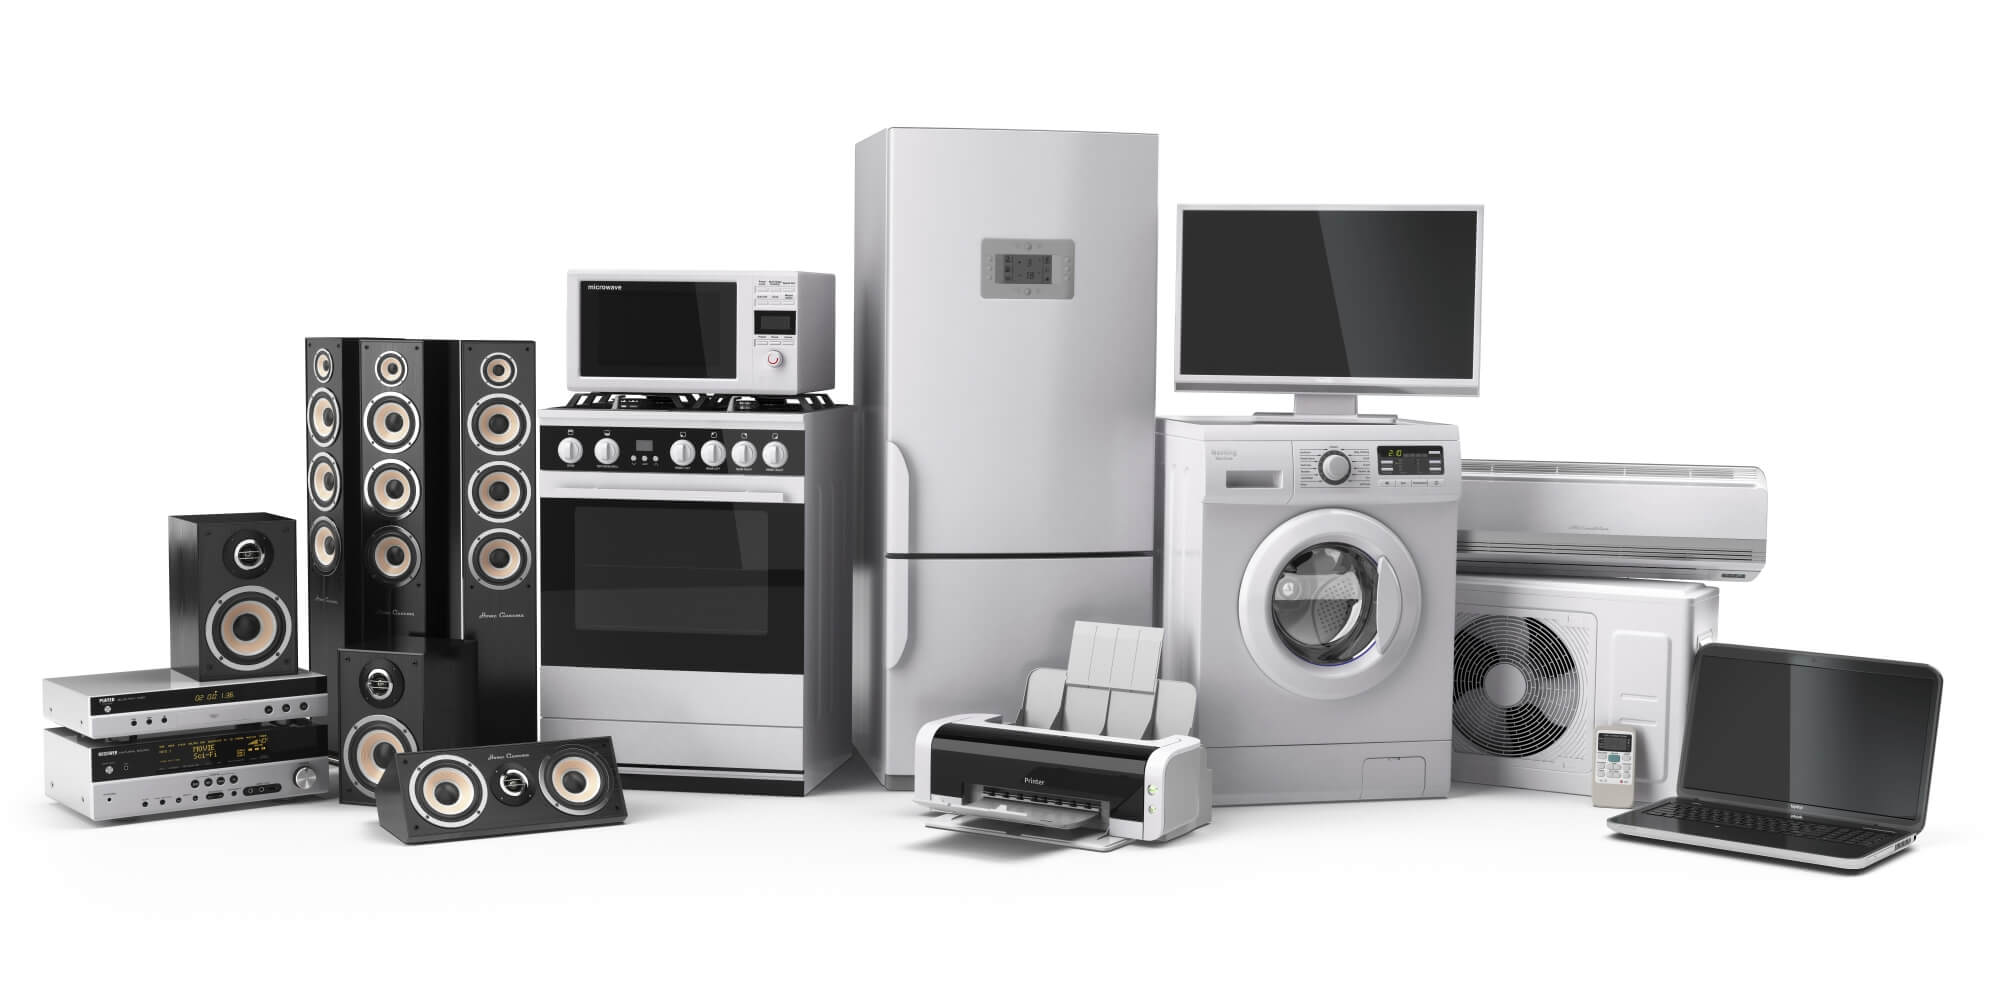 Local Potters Bar Appliance Installation Service Three Rivers